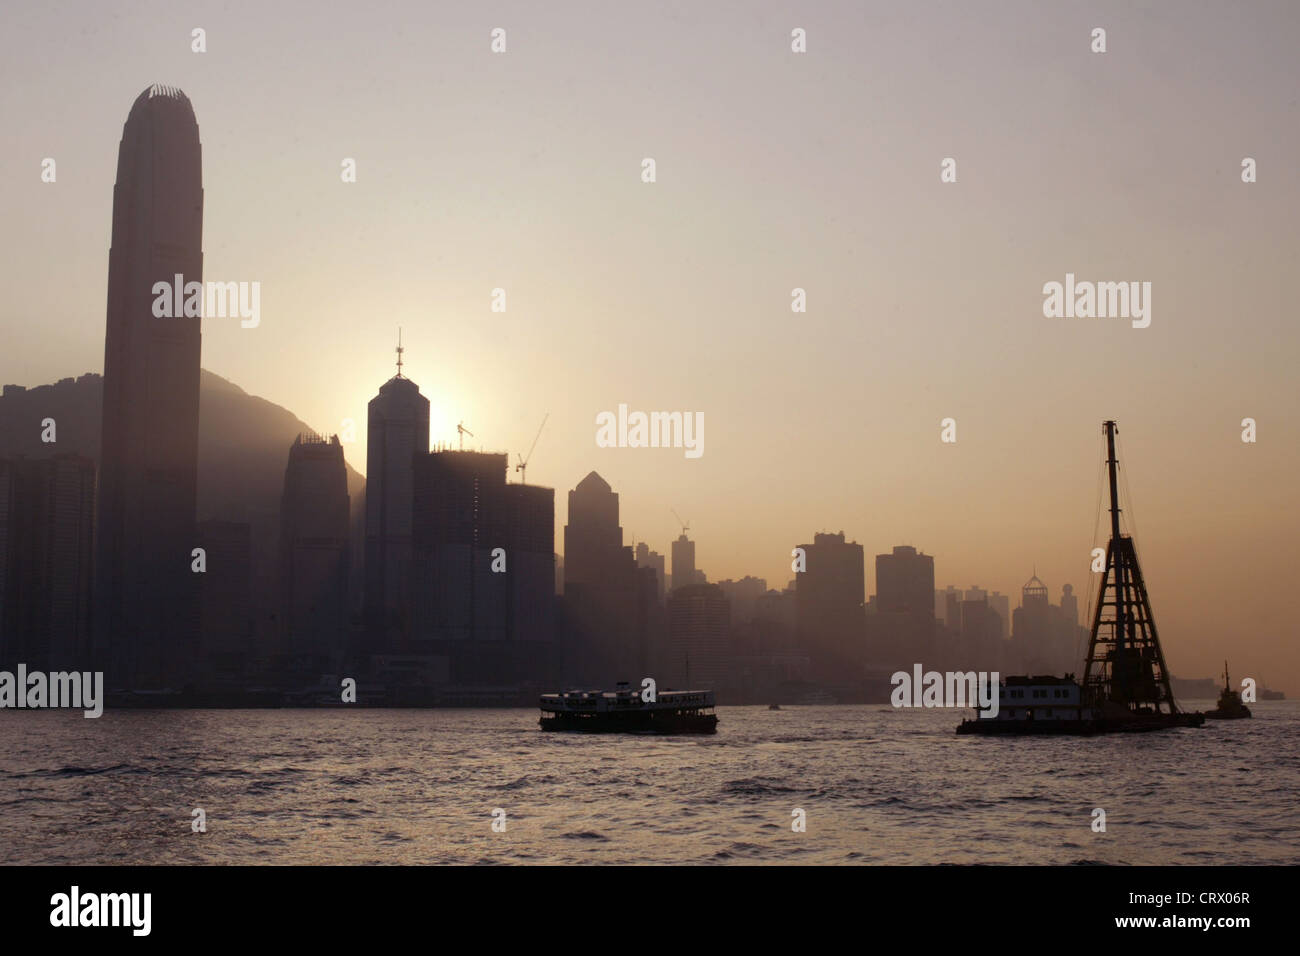 The skyline of Hong Kong Iceland in the evening light Stock Photo